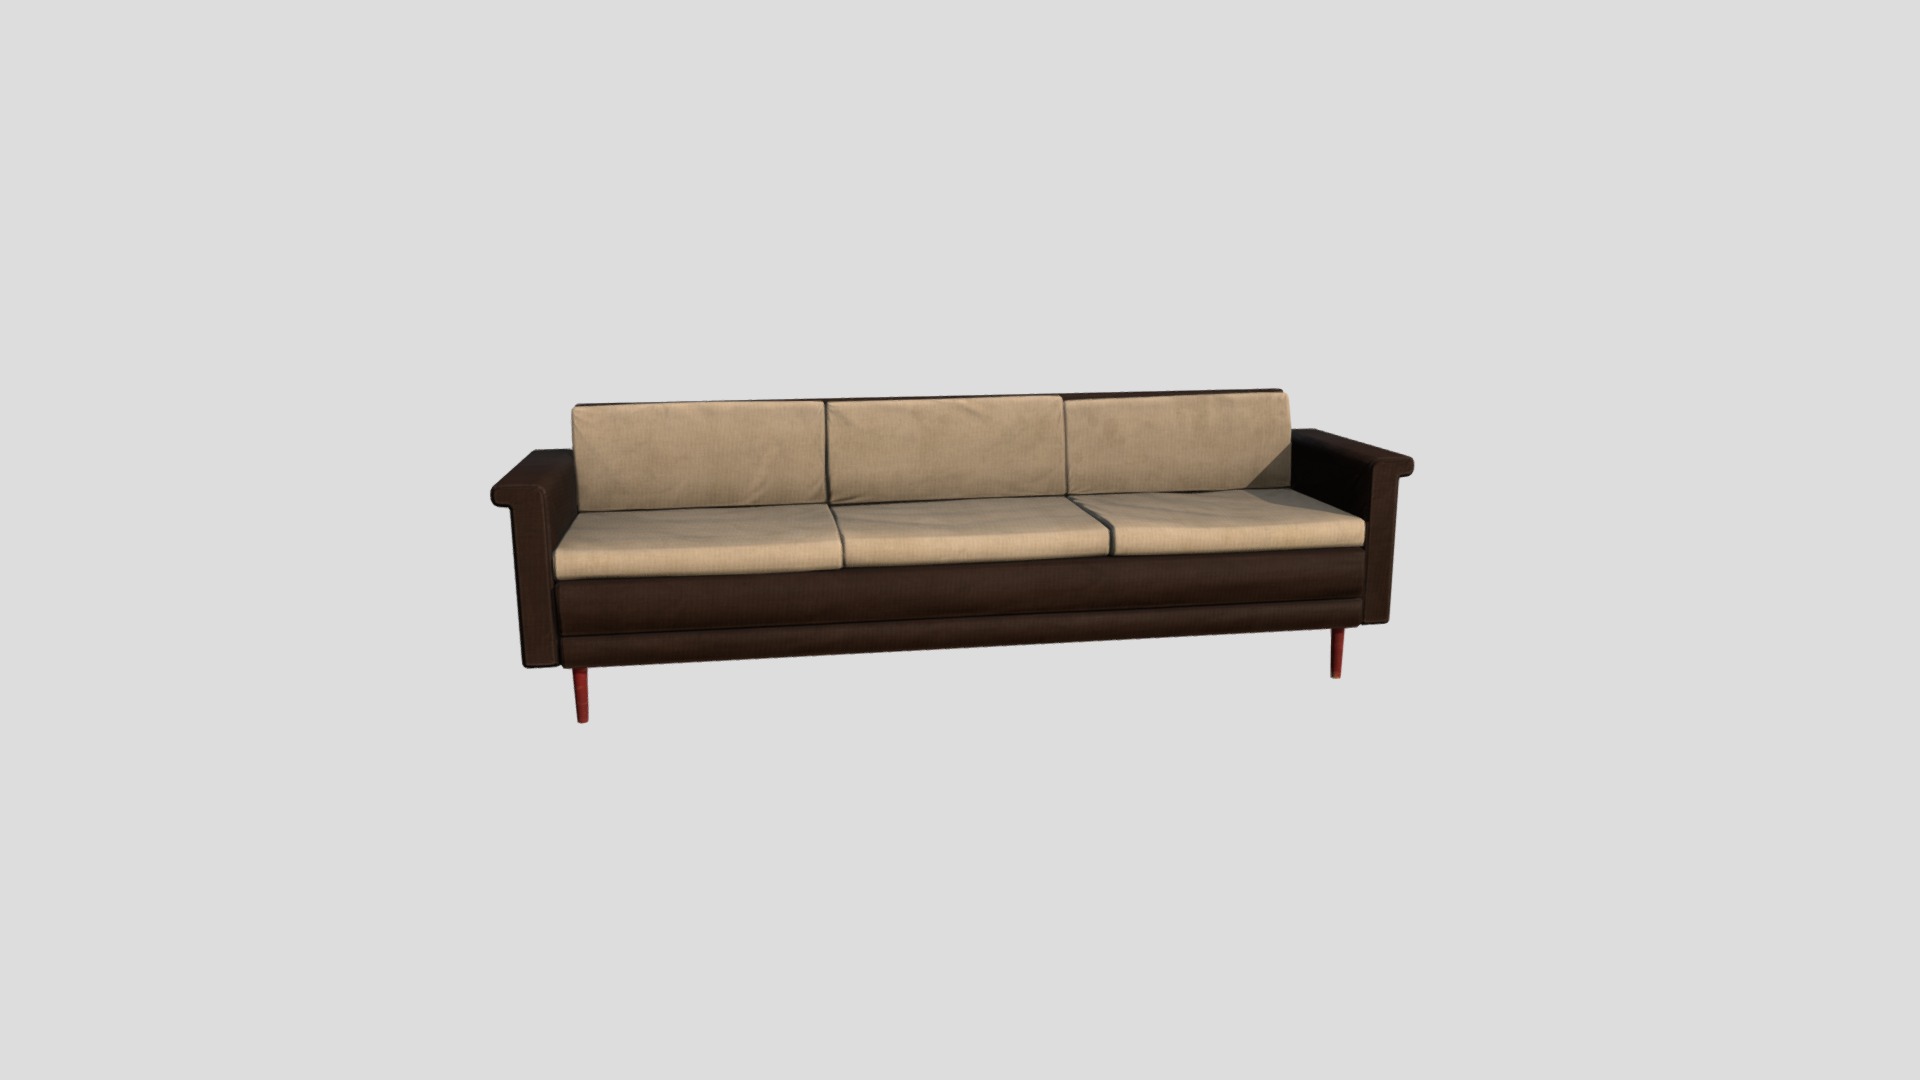 3D model Sofa 02 - This is a 3D model of the Sofa 02. The 3D model is about a brown leather chair.